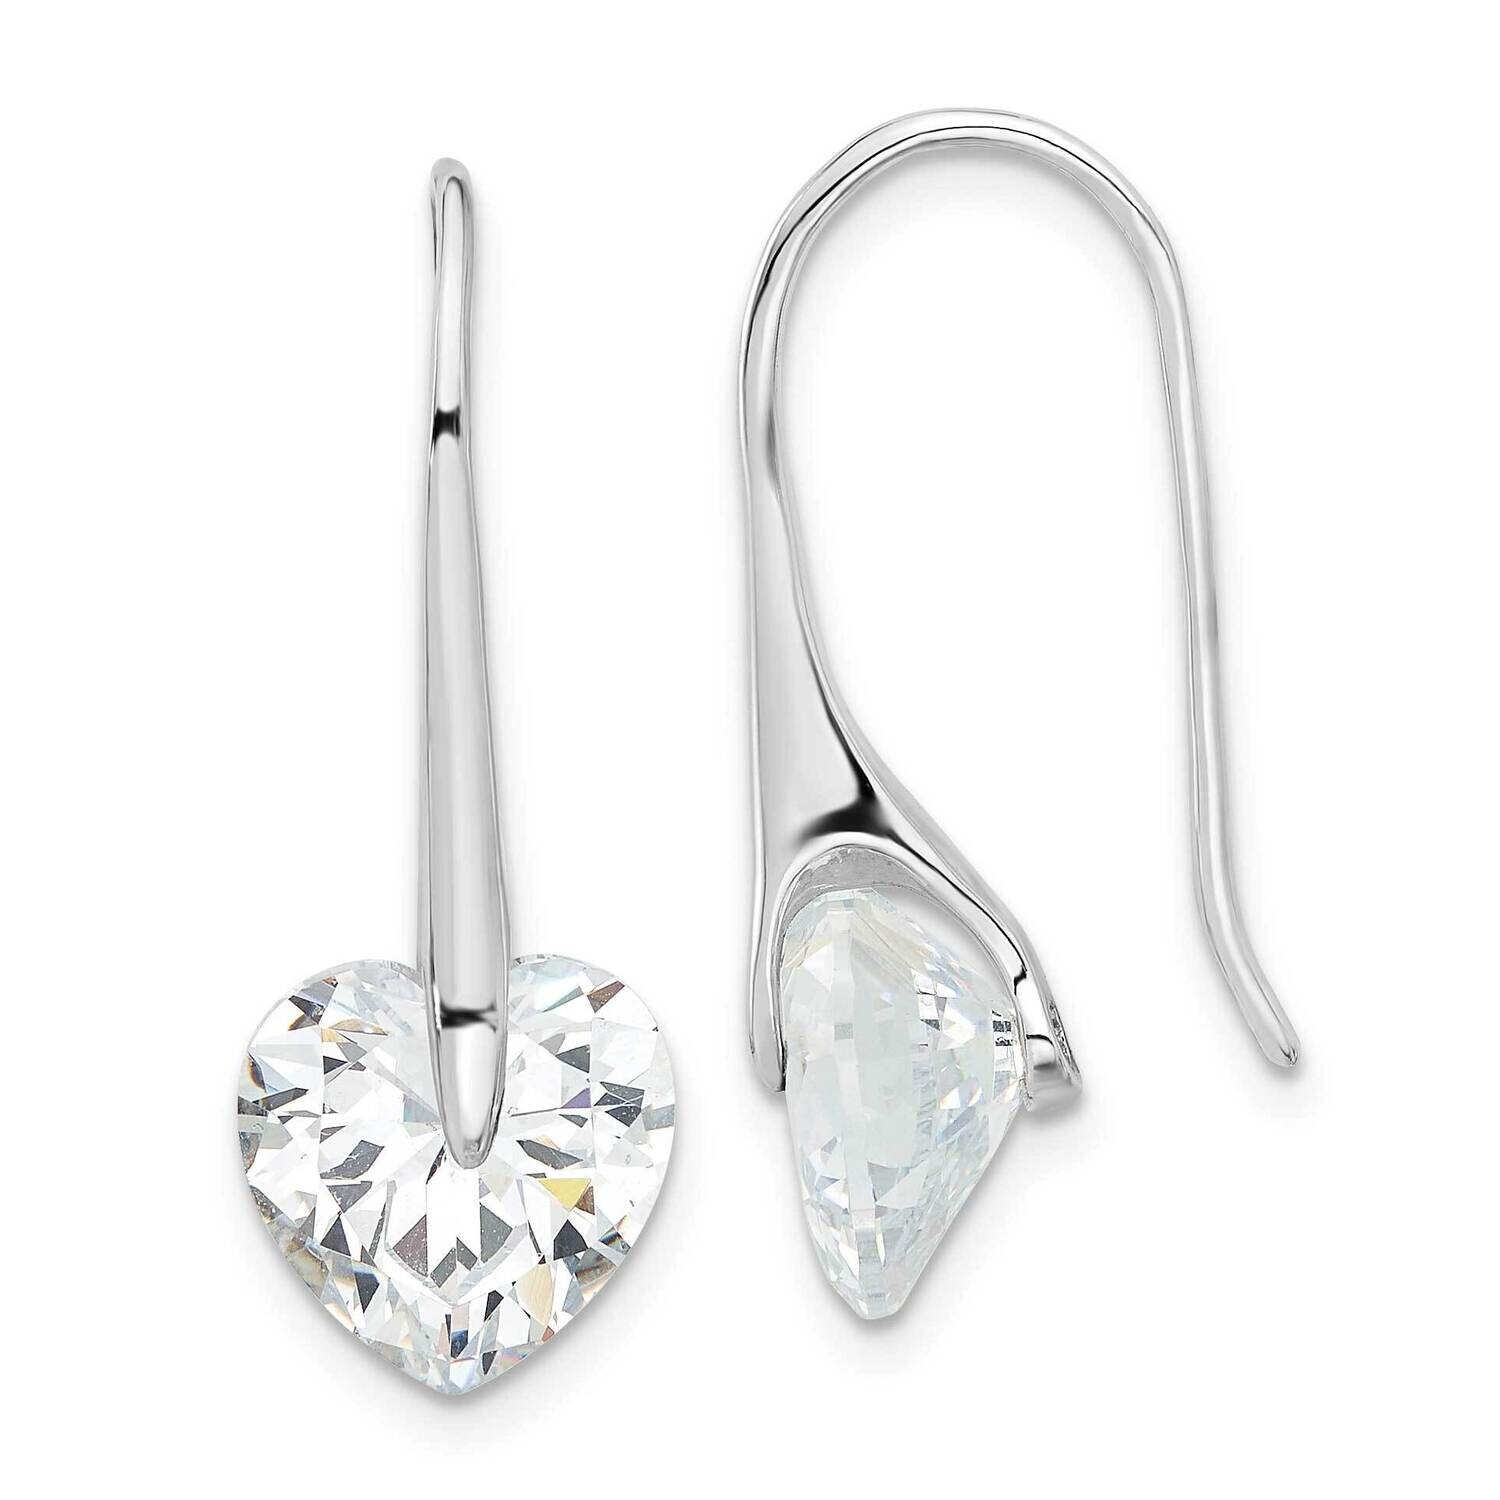 Rhod-Plated Polished Heart CZ Threader Hook Earrings Sterling Silver QE17139